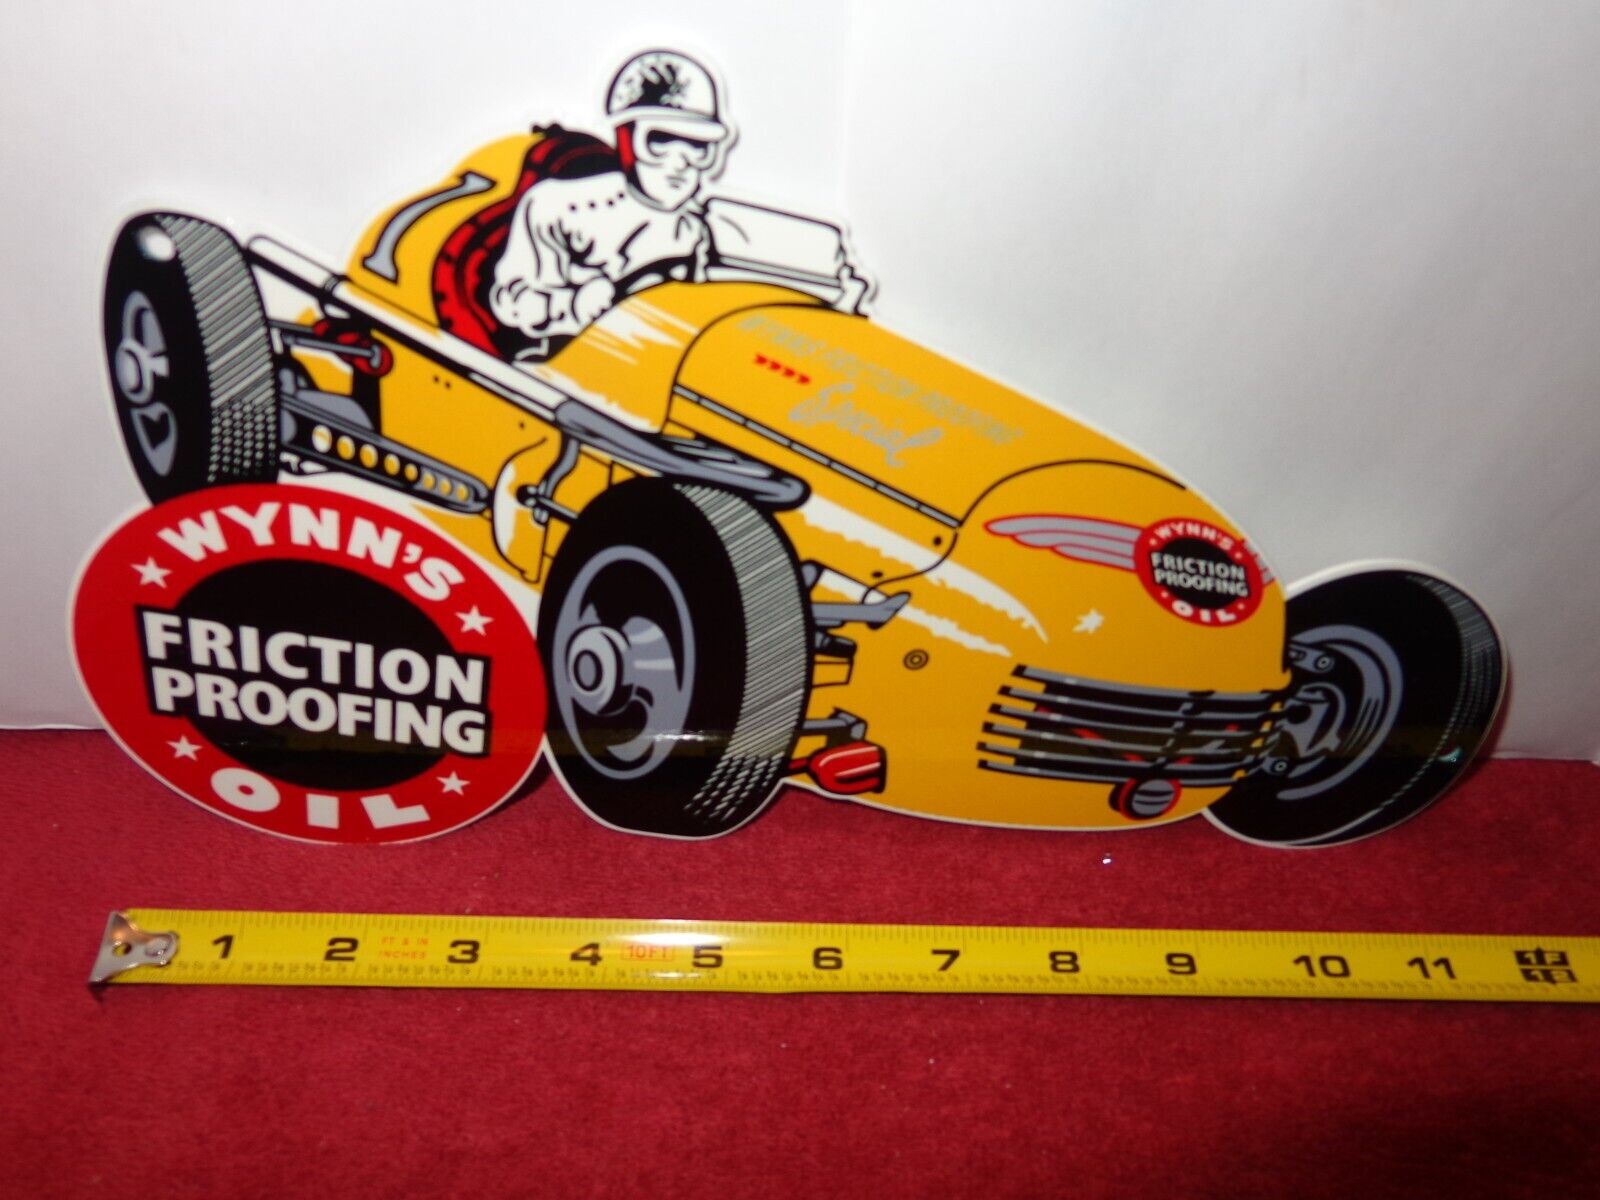 11 x 7 in WYNN`S FRICTION PROOFING SPECIAL OIL ADV. SIGN DIE CUT METAL  # Z 247